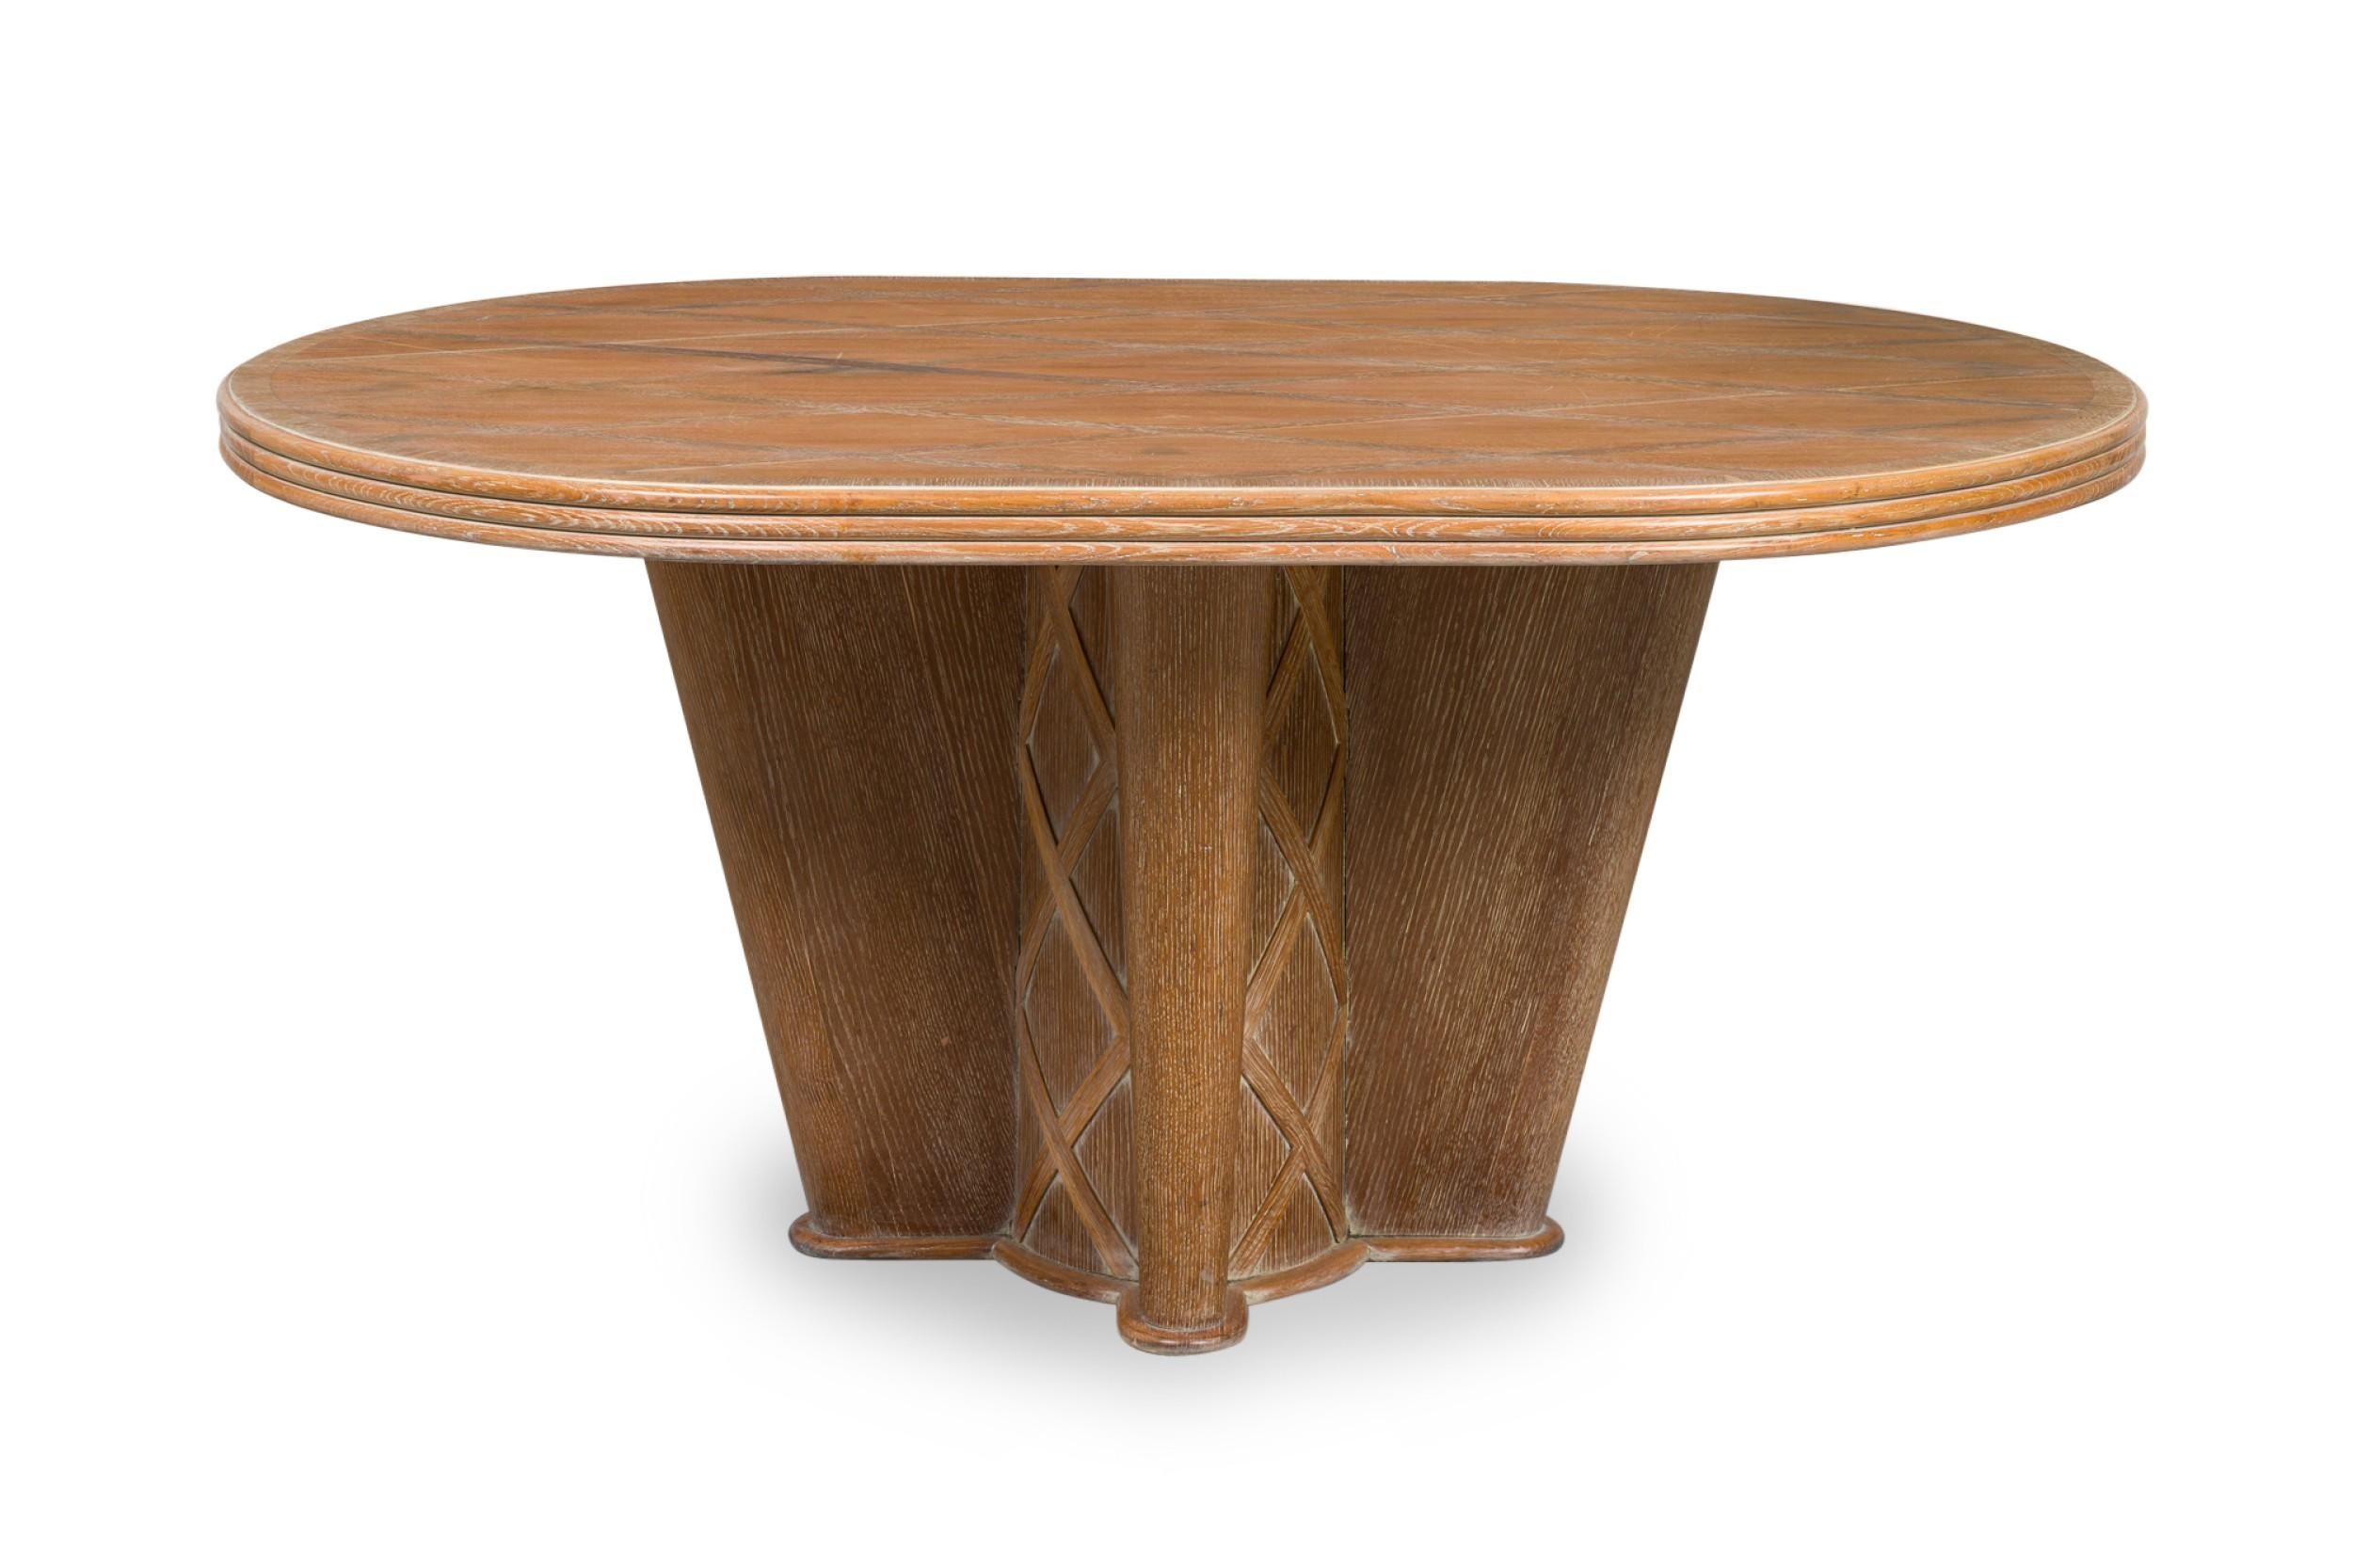 Inlay Soubrier Mid-Century French Limed Oak Inlaid Dining Table For Sale